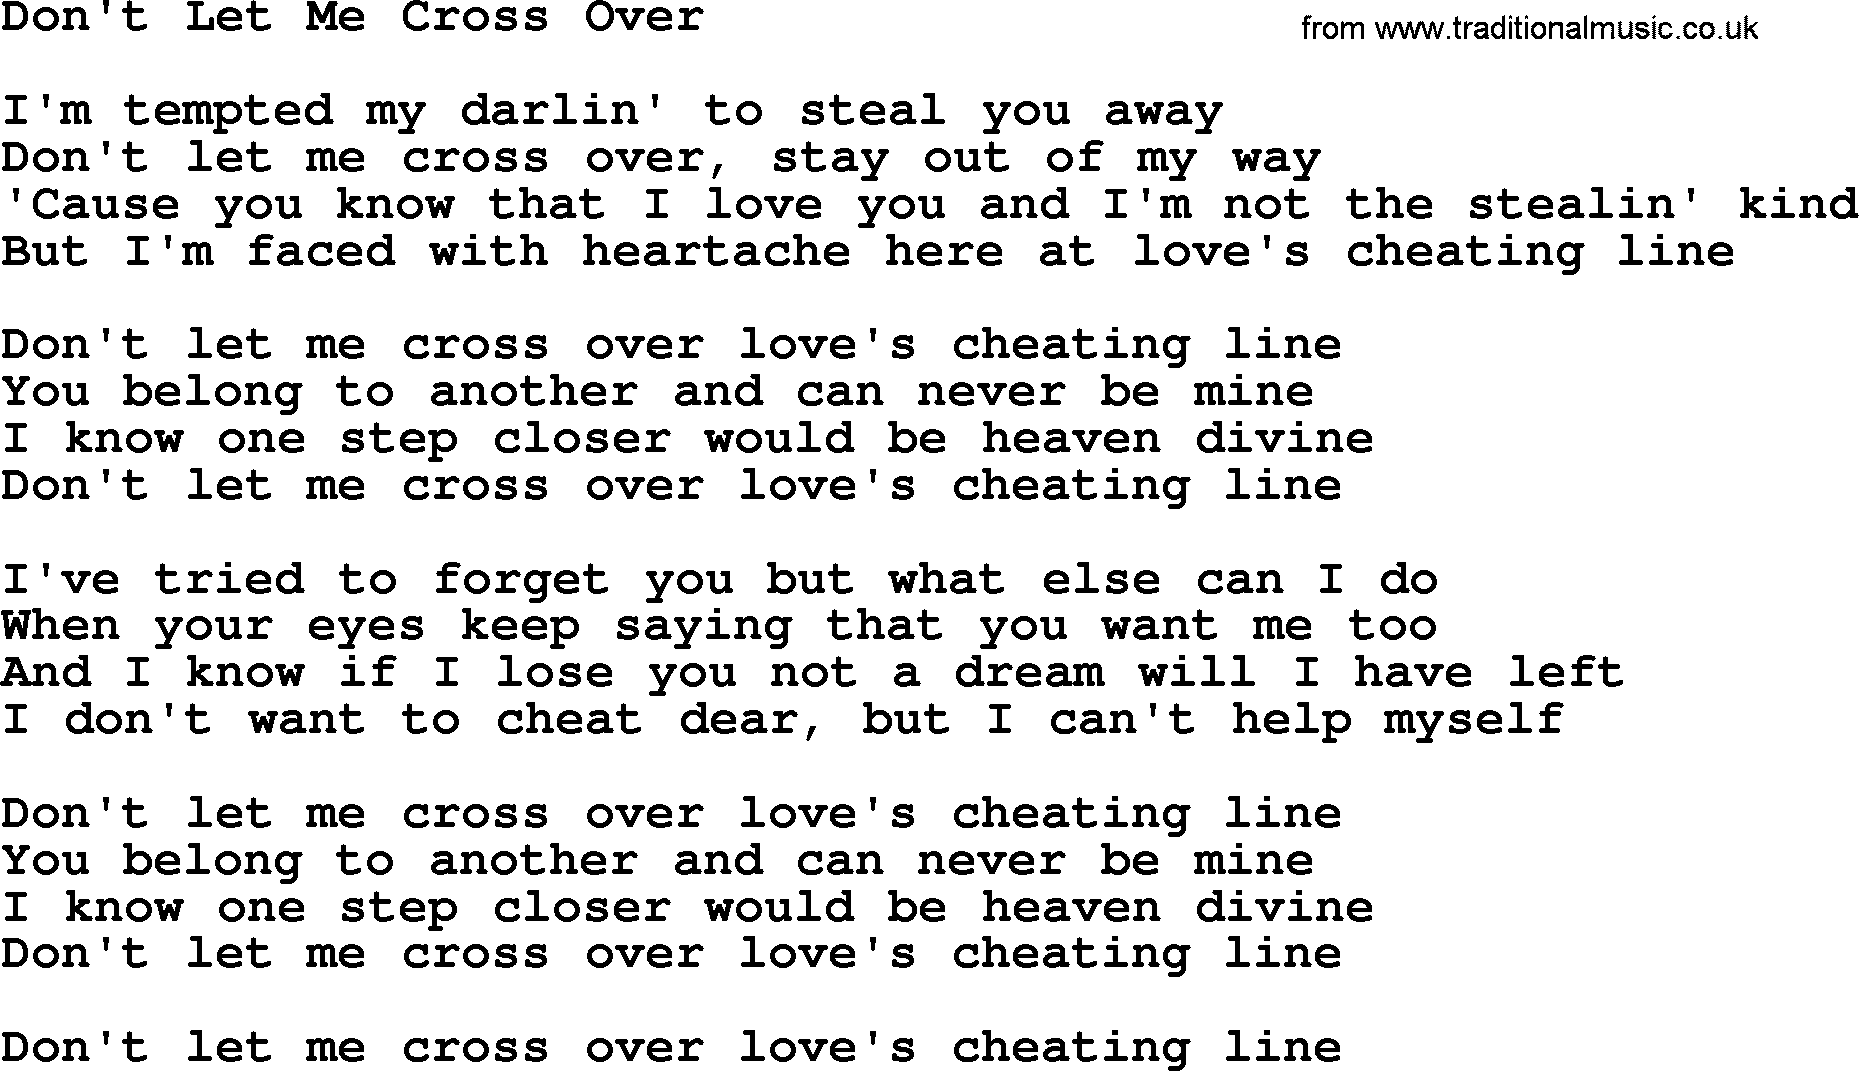 Dolly Parton song Don't Let Me Cross Over.txt lyrics